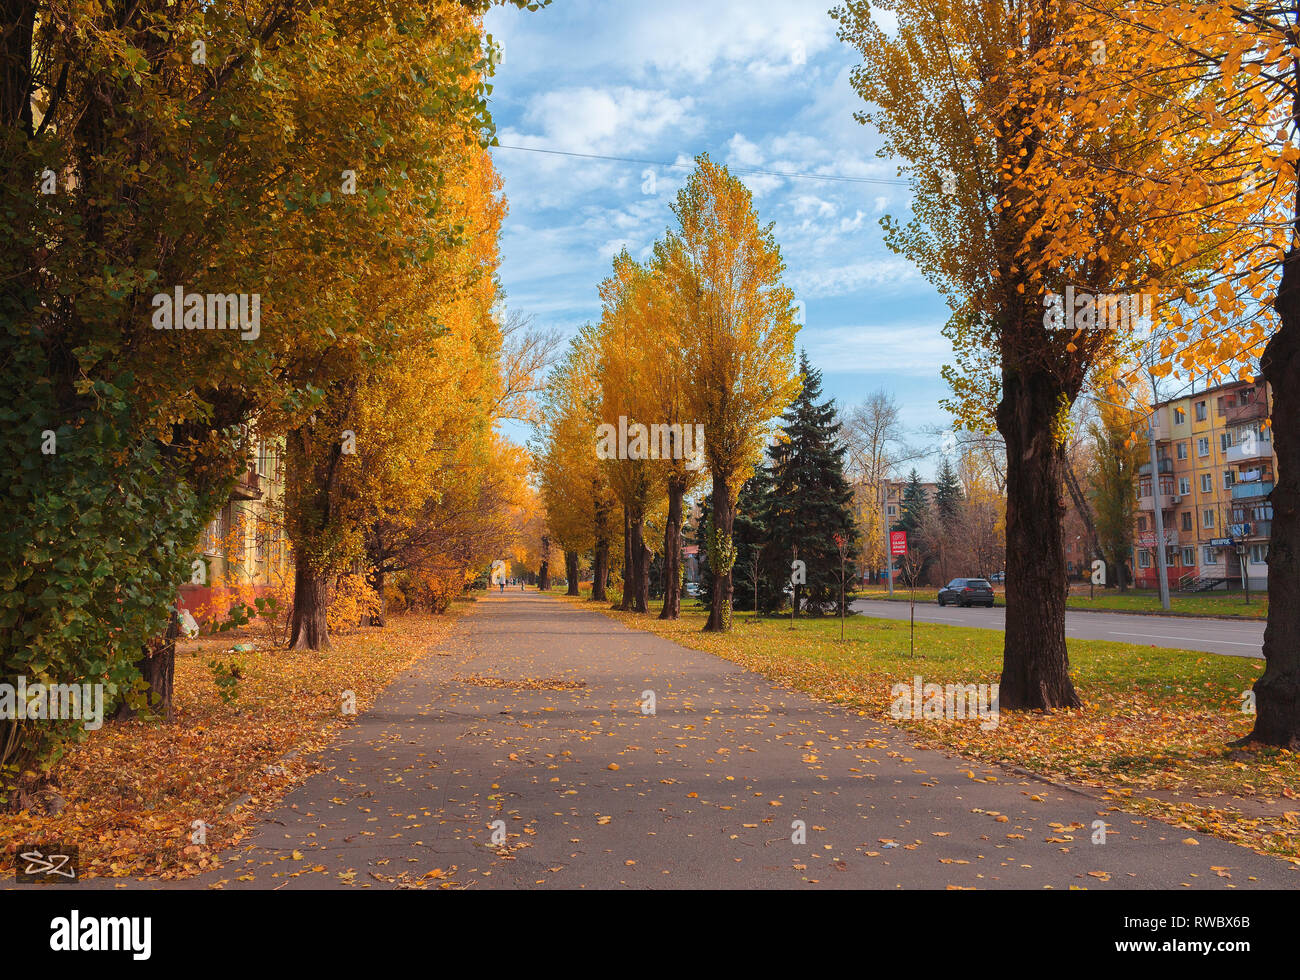 Autumn landscape. A poplars alley on the blue sky background. A autumn city landscape with houses and cars on the road. Stock Photo